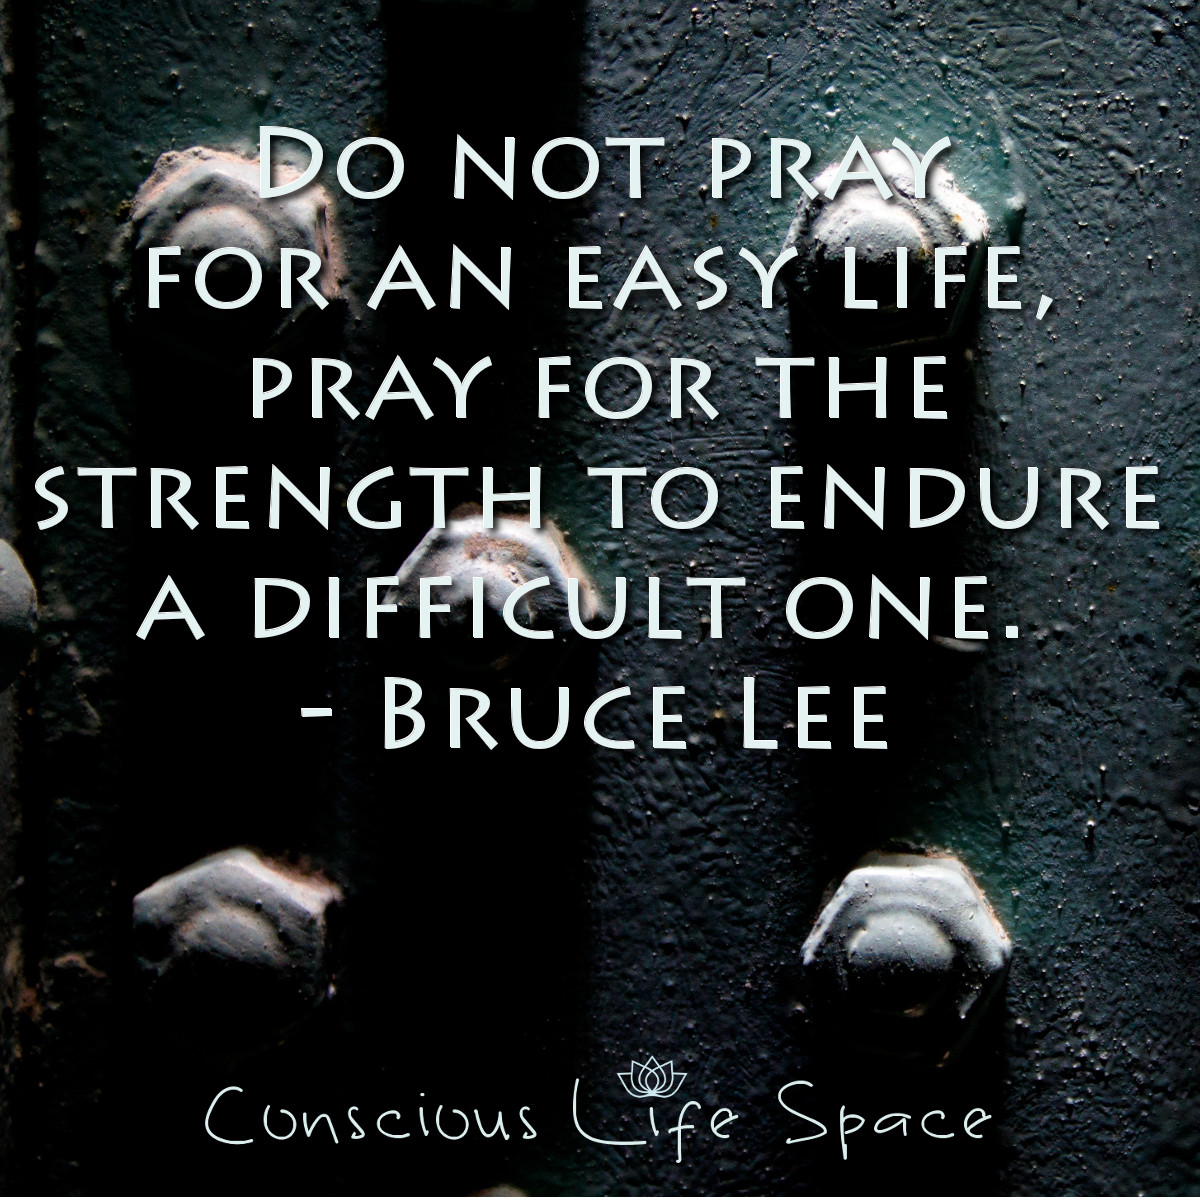 Do not pray for an easy life, pray for the strength to endure a difficul one. - Bruce Lee